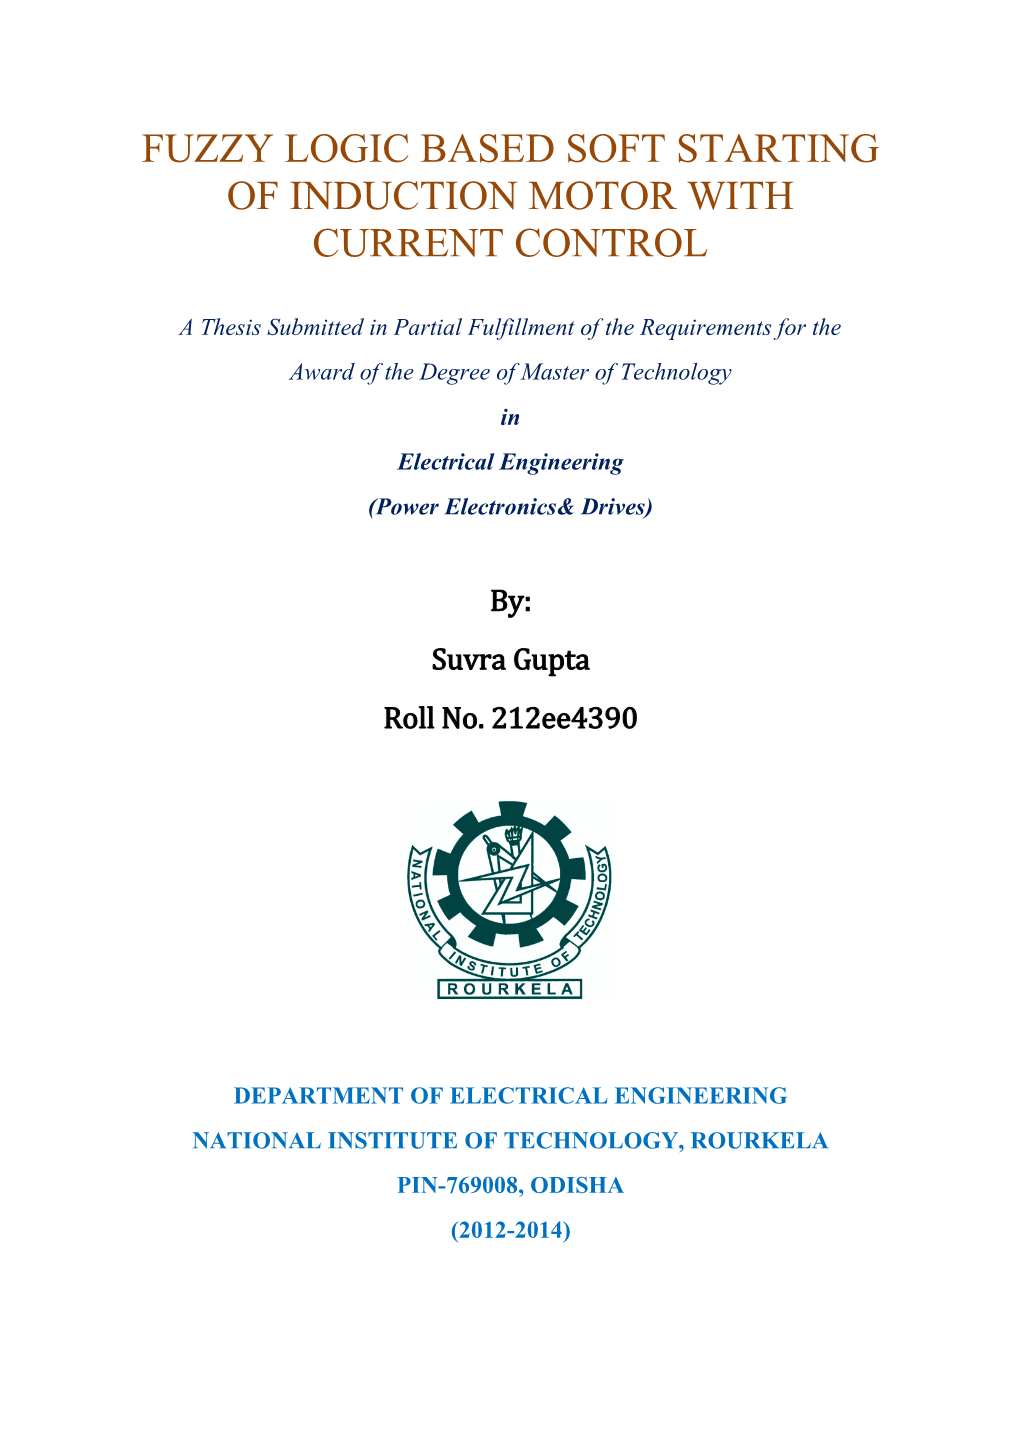 Fuzzy Logic Based Soft Starting of Induction Motor with Current Control